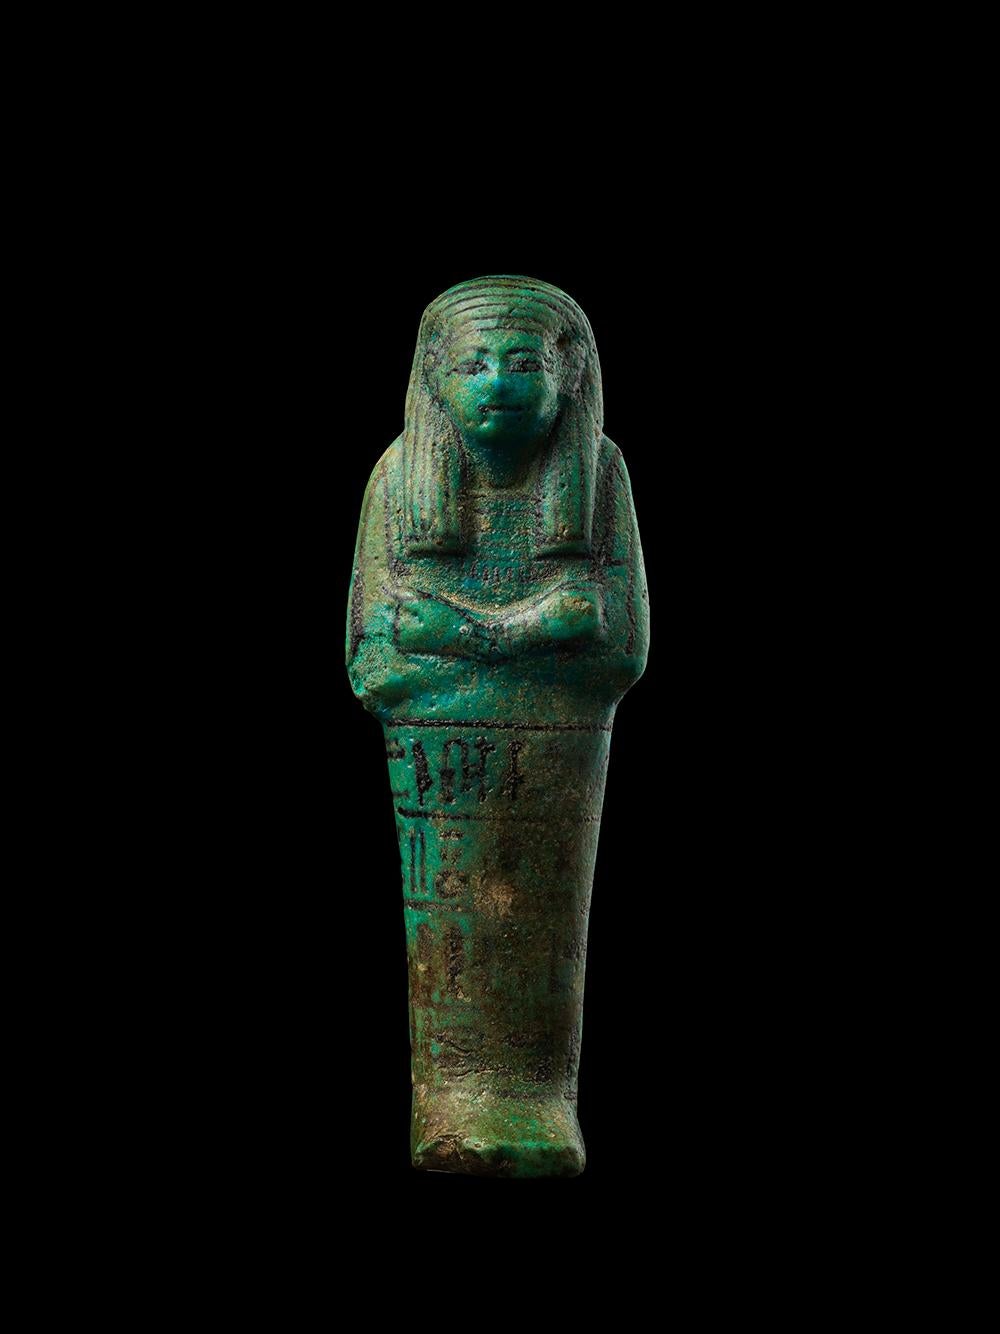 A mummiform ushabti in blue faience. Four registers of hieroglyphic characters are painted around the lower half of the ushabti, with a vertical column of hieroglyphs in the centre of the back. The inscription dedicates the ushabti to the royal